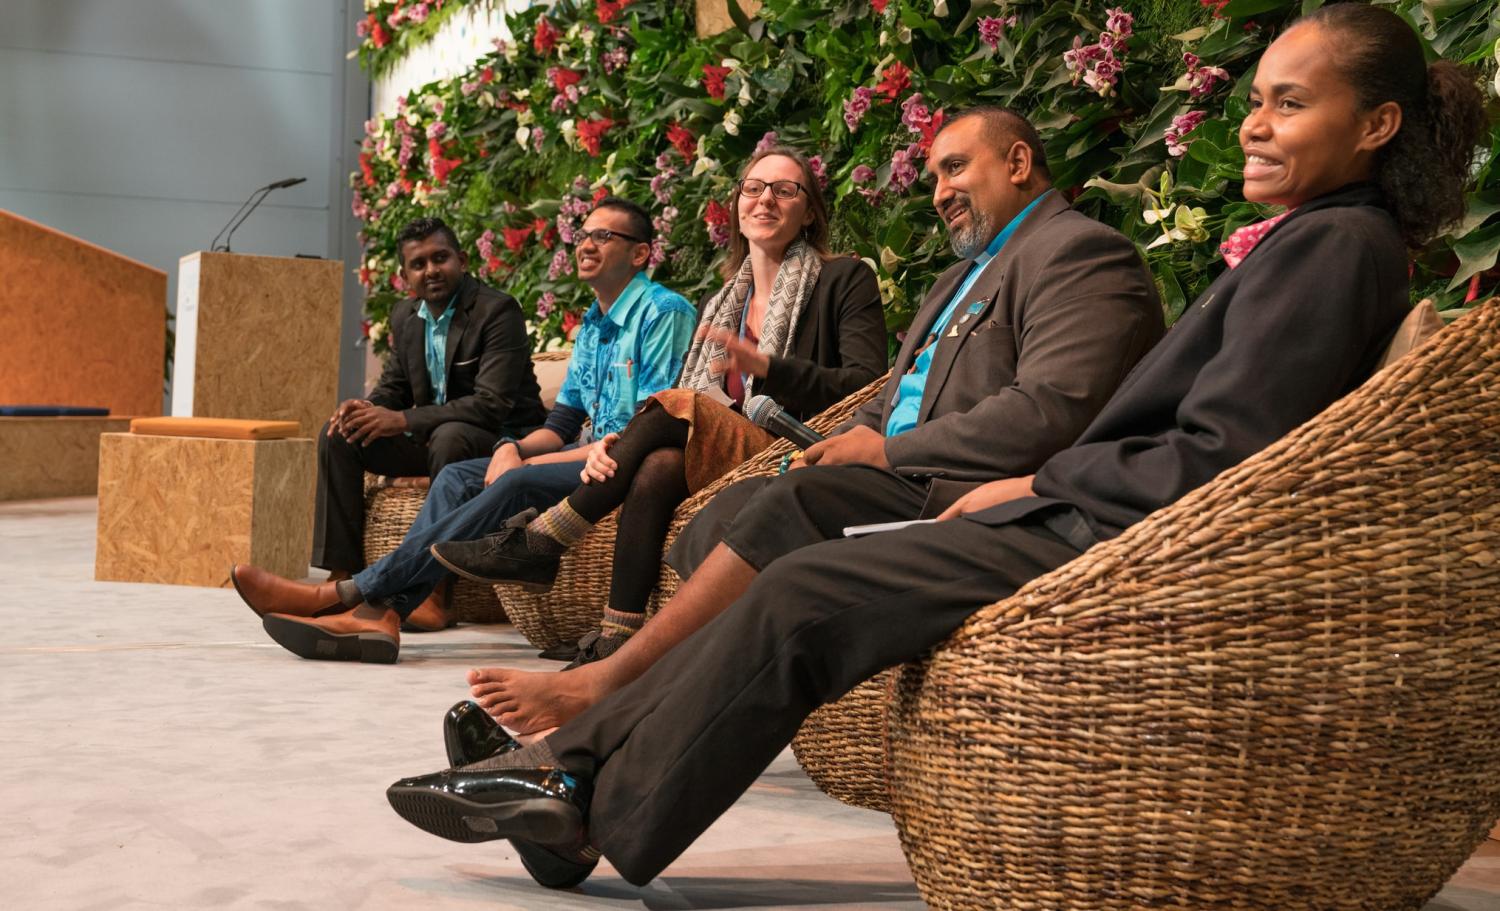 A 'Talanoa' meeting during climate talks in Bonn, Germany in November (Photo: UNclimatechange/Flickr)